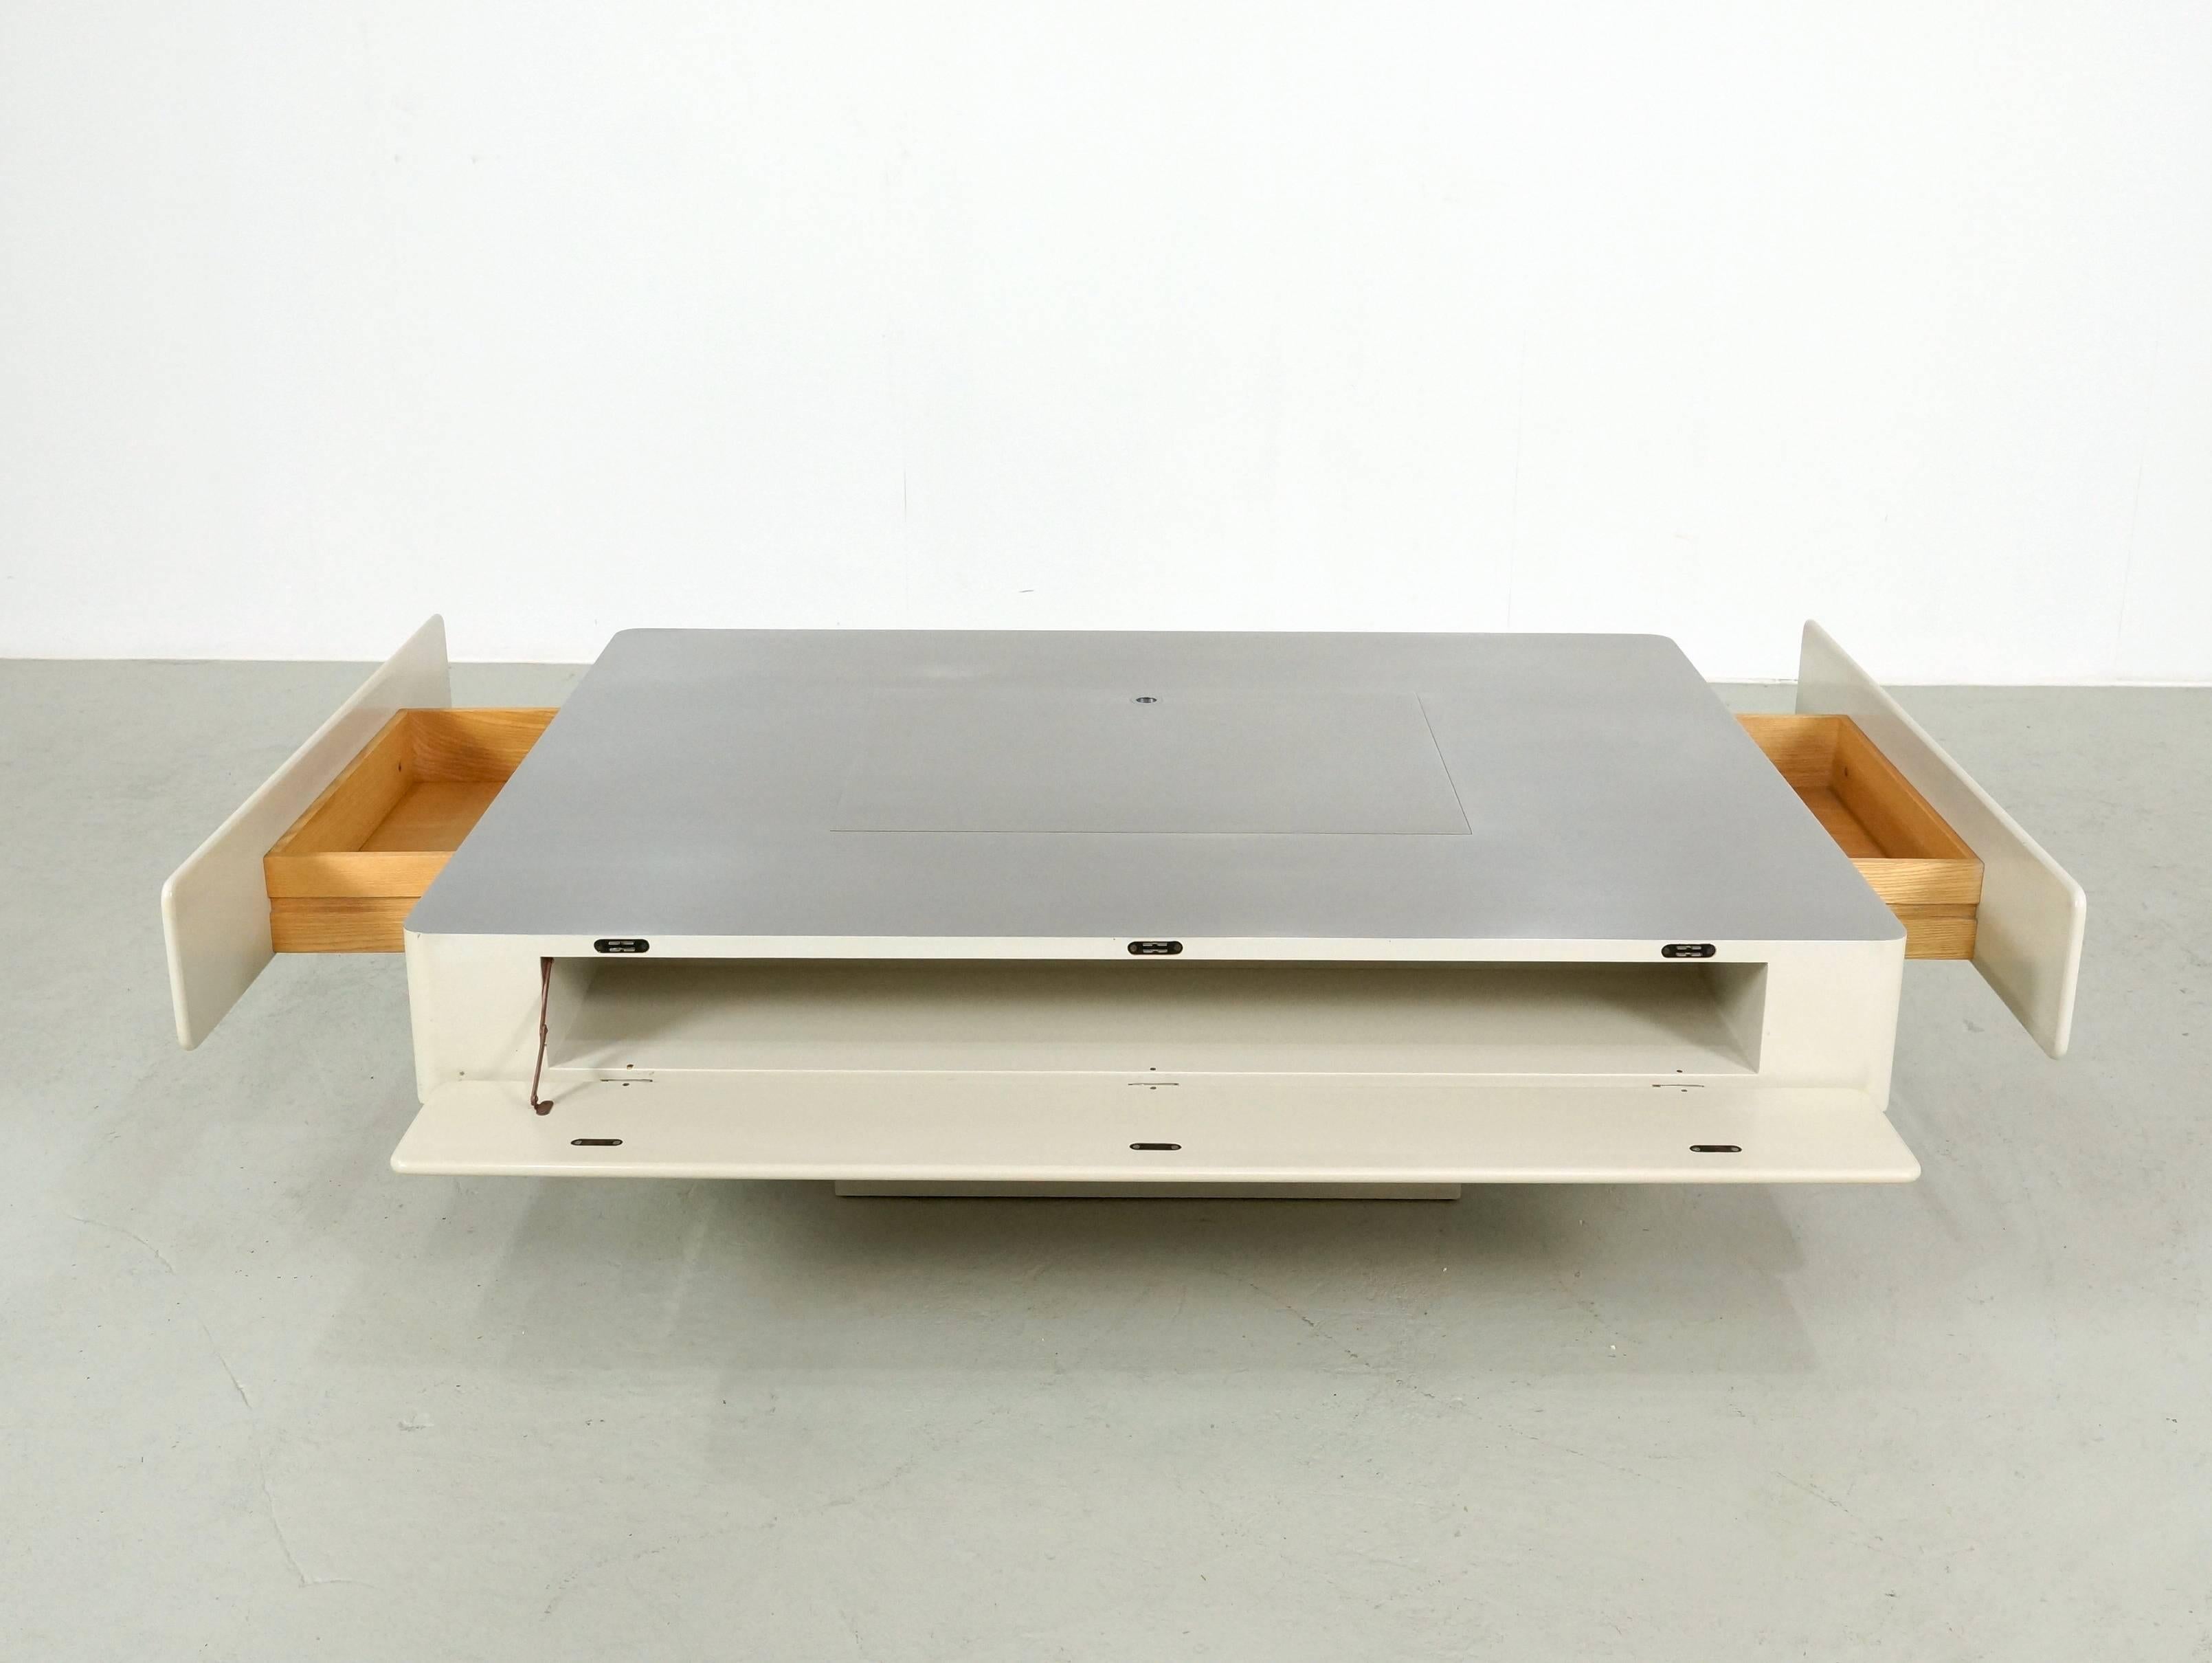 Off-White Vico Magistretti Caori Coffee Table with Record Storage, 1962 In Good Condition In 's Heer Arendskerke, NL